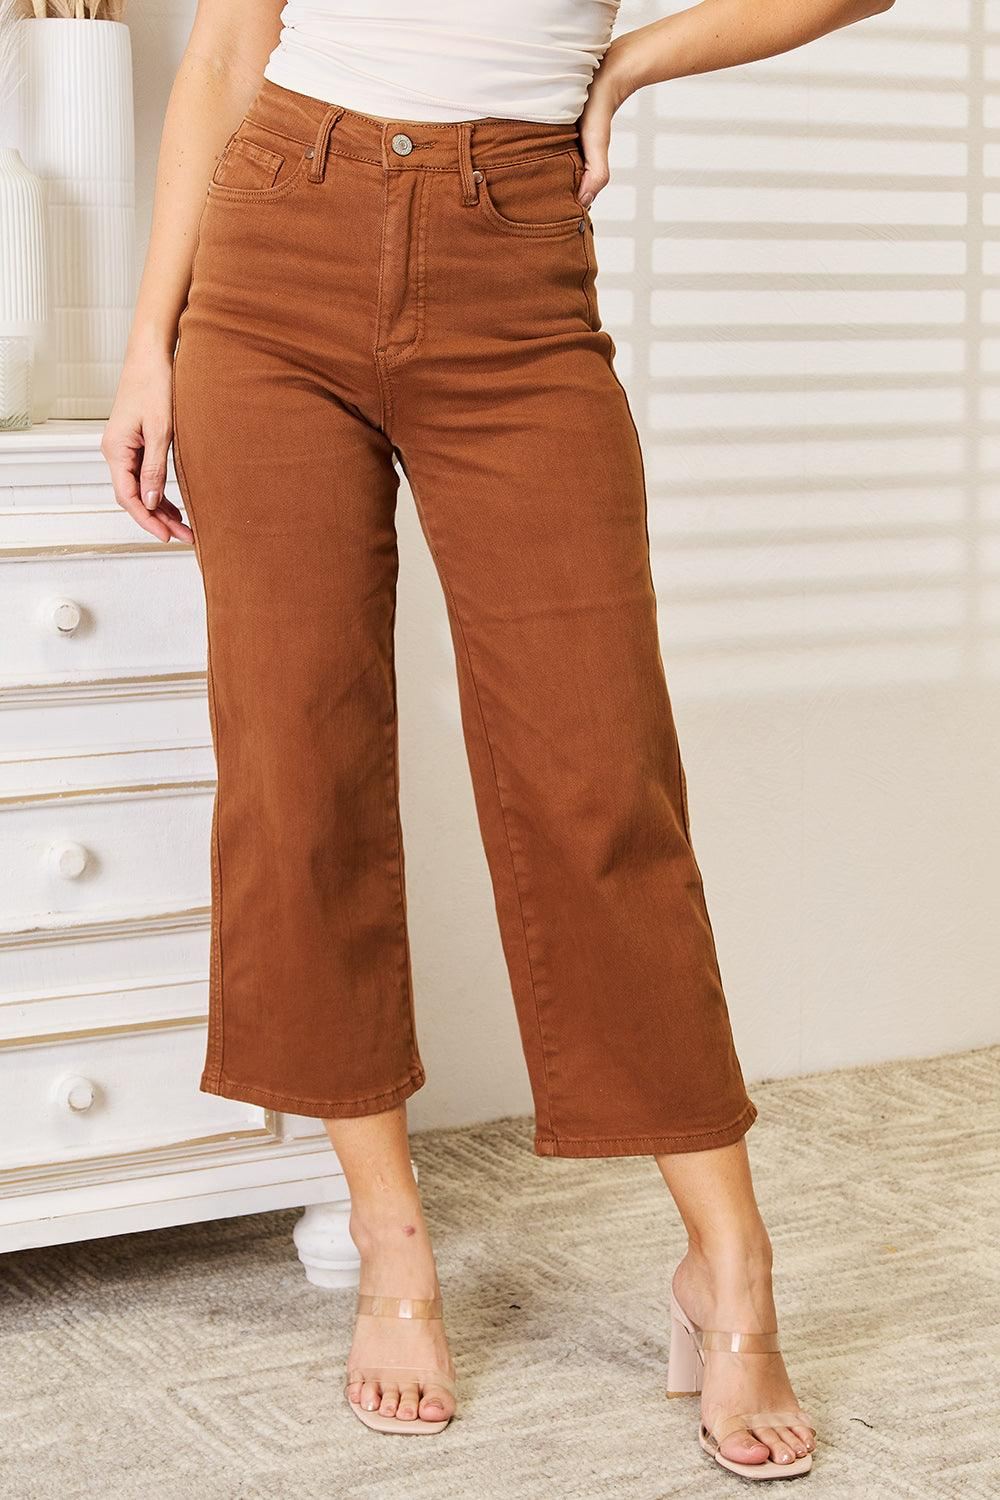 Judy Blue Cropped Jeans - Inspired Eye Boutique